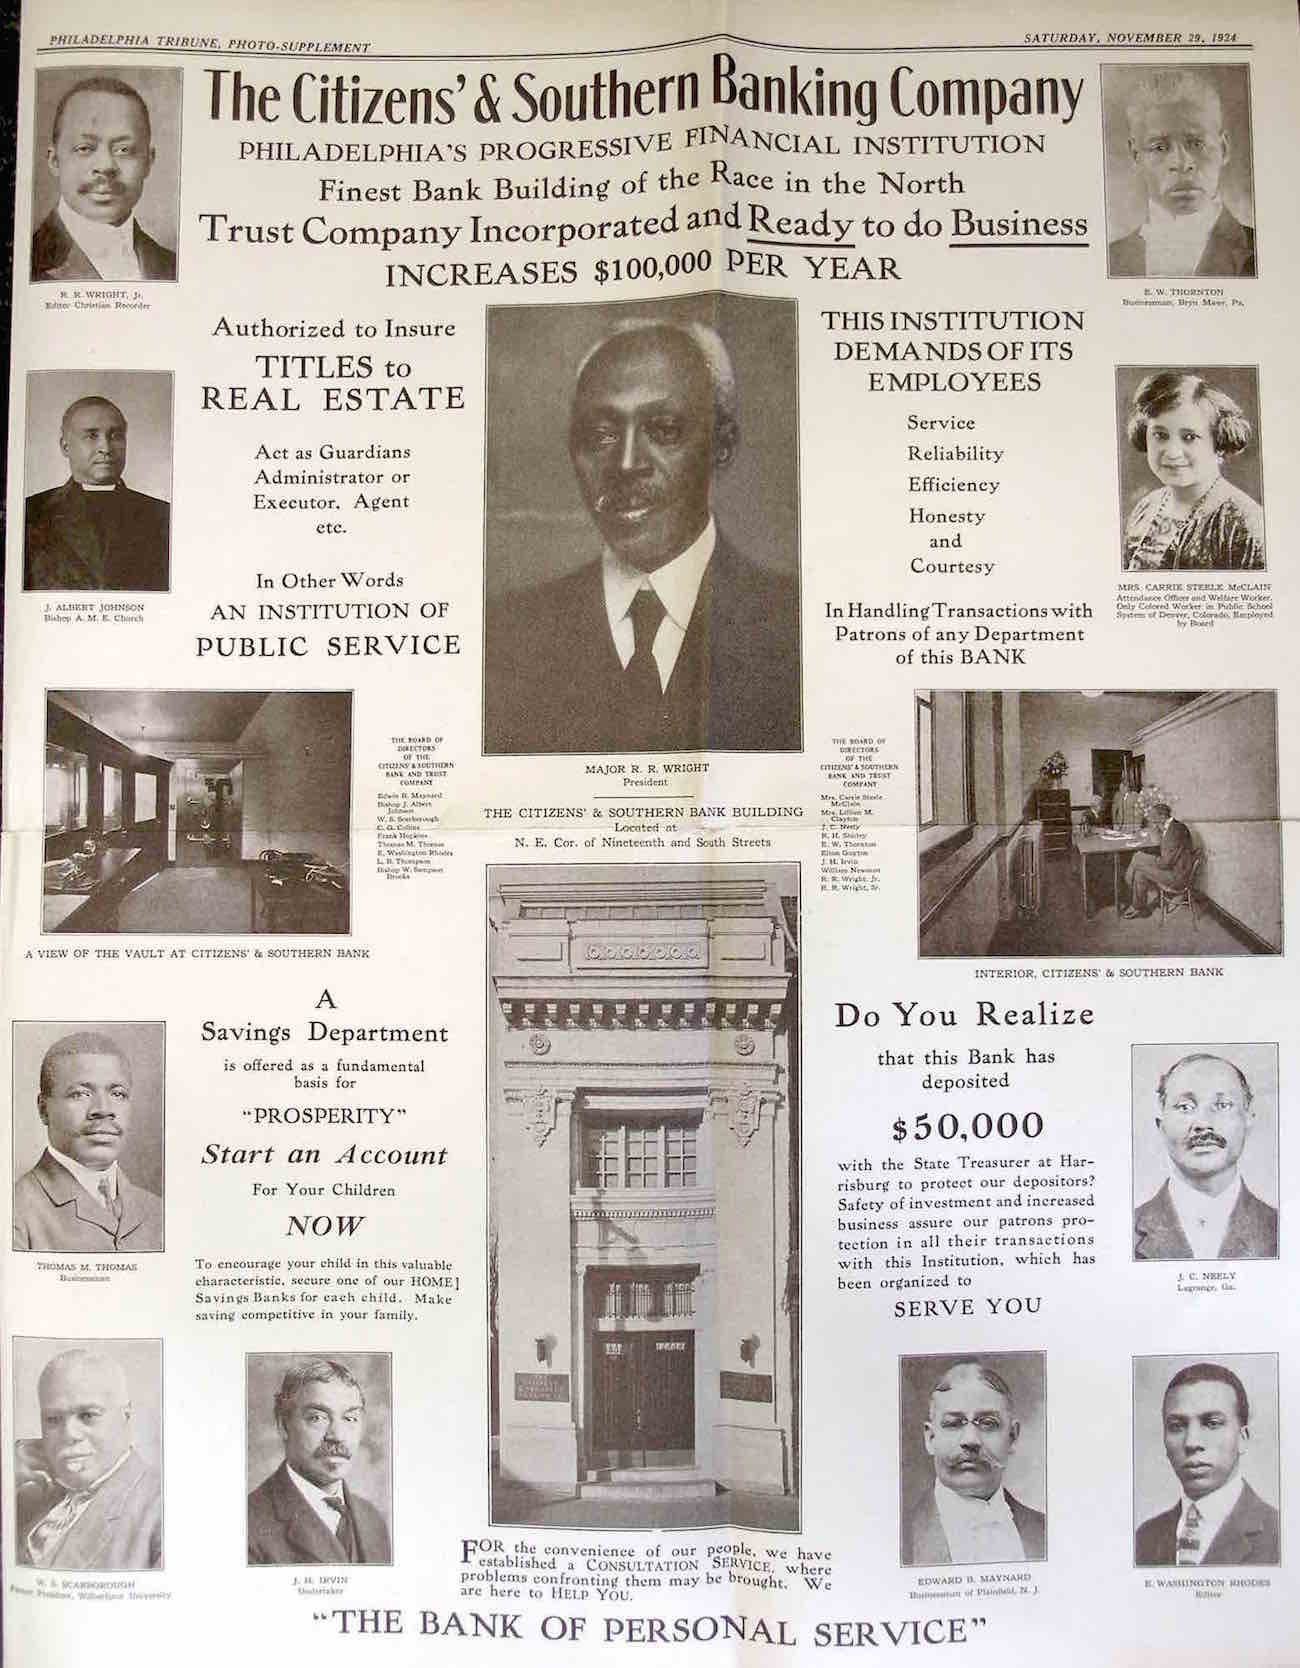 Philadelphia Tribune full-page pictorial of the Citizens & Southern Bank, 1924